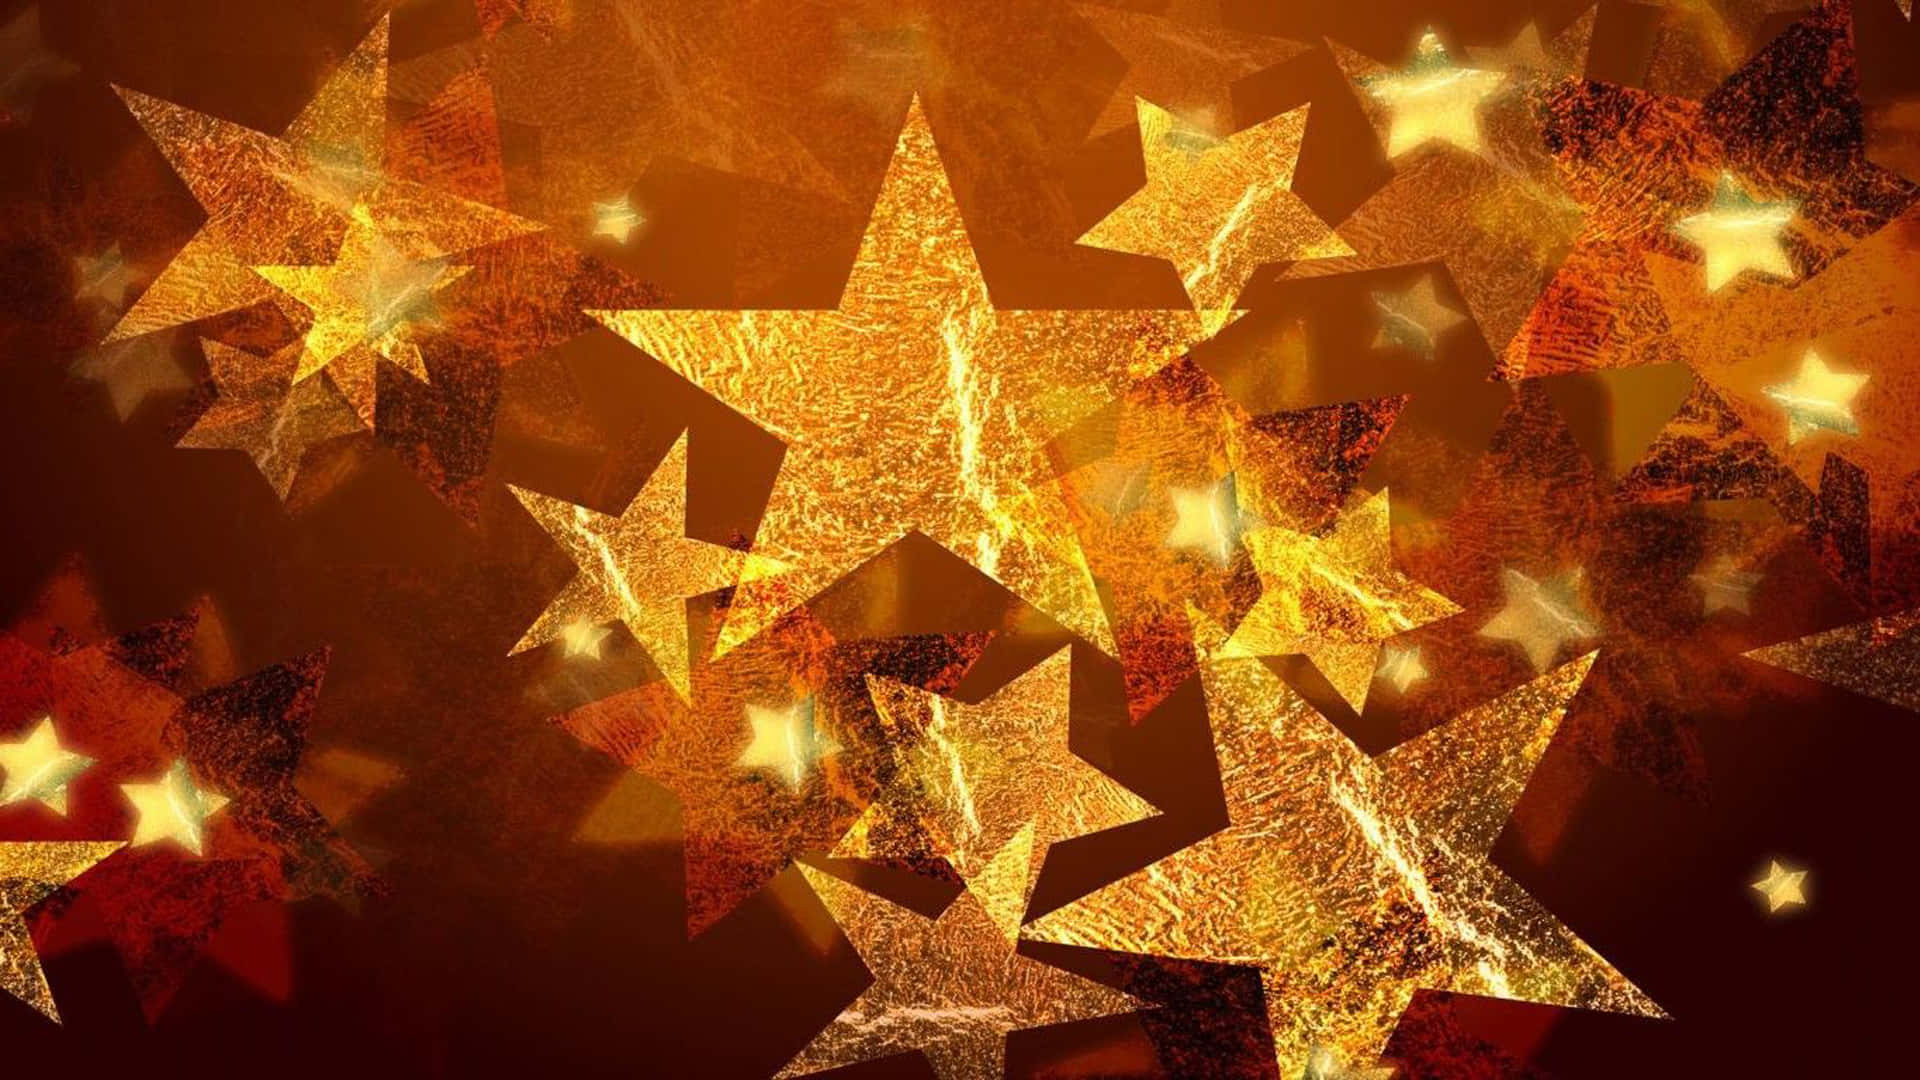 A sparkling Christmas star adds festive cheer to the decorations. Wallpaper